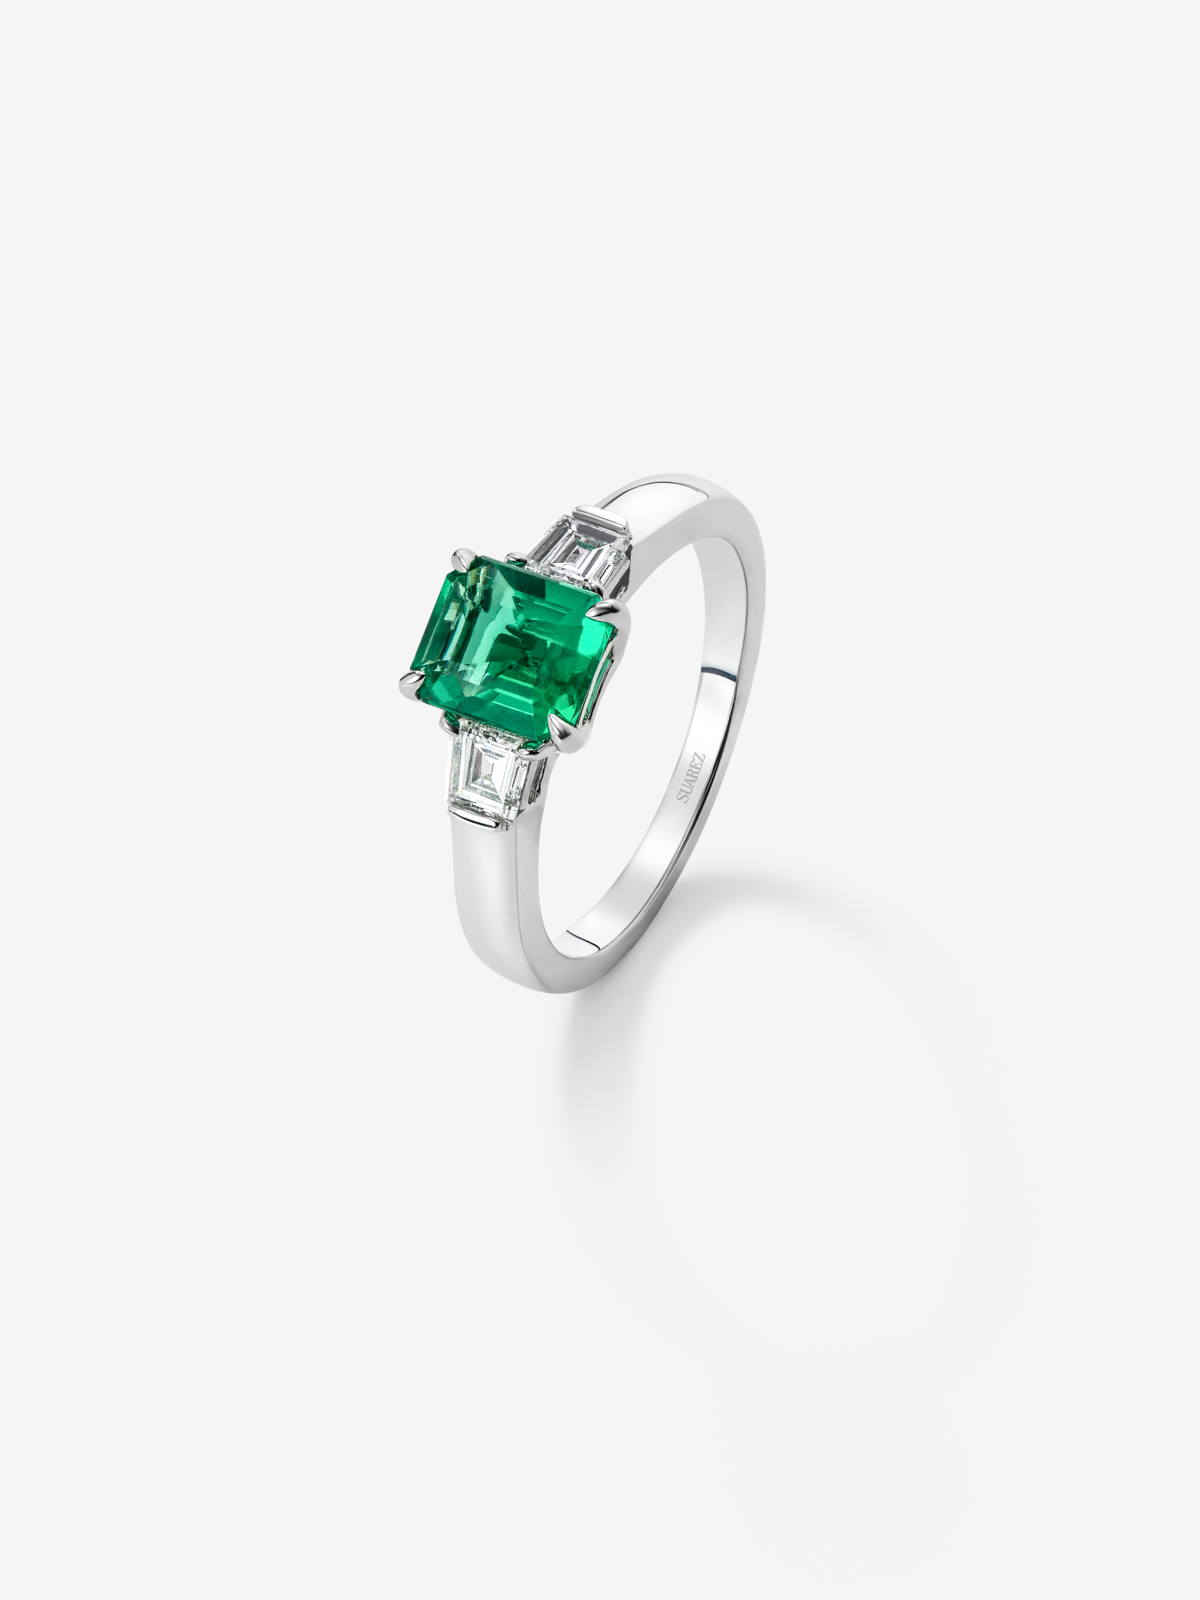 18K White Gold Tieillo Ring with Esmeralda Vivid in Emerald Size 1.64 CTS and 0.4 CTS diamonds